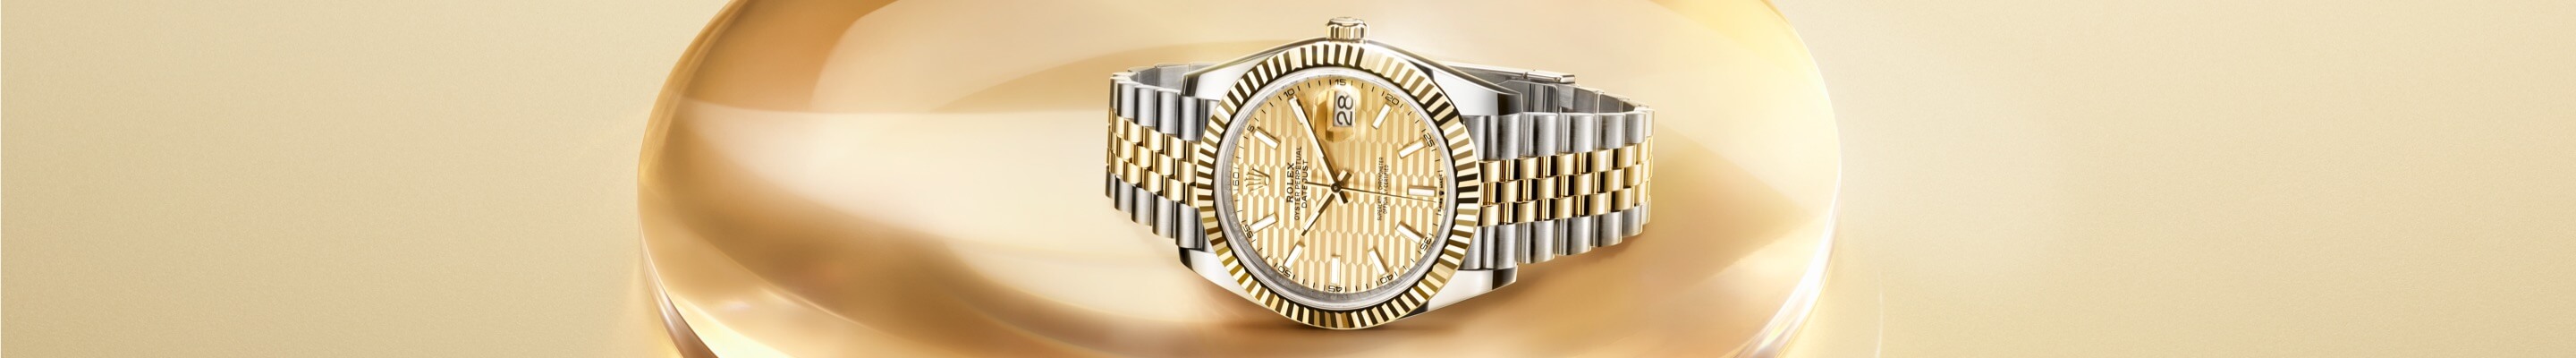 Rolex Datejust: The Watch of Historical Encounters